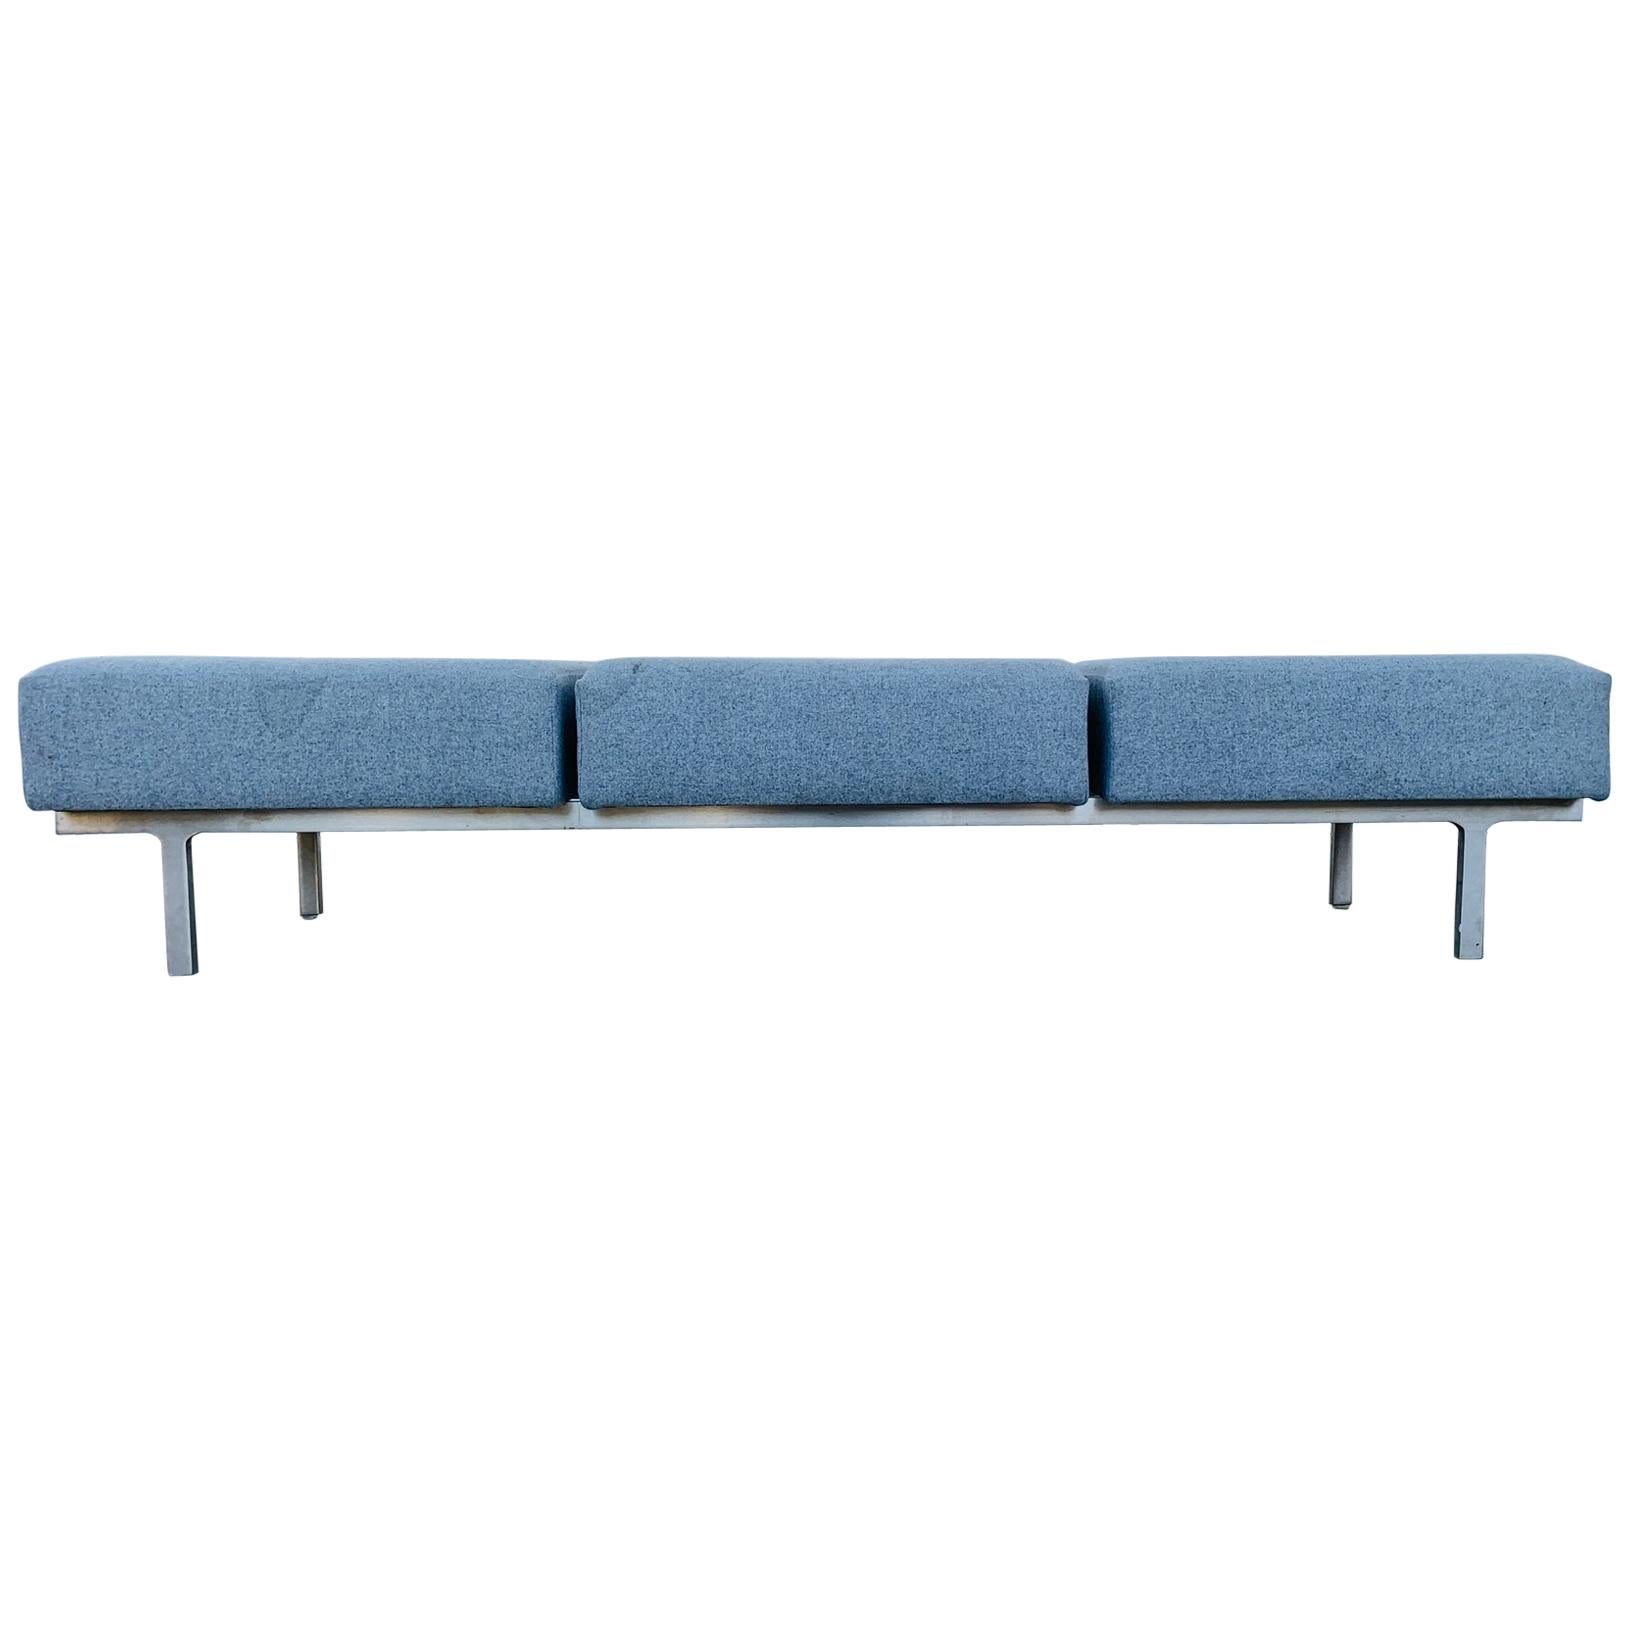 3 Seater Canal Bench by Keilhauer, Canada